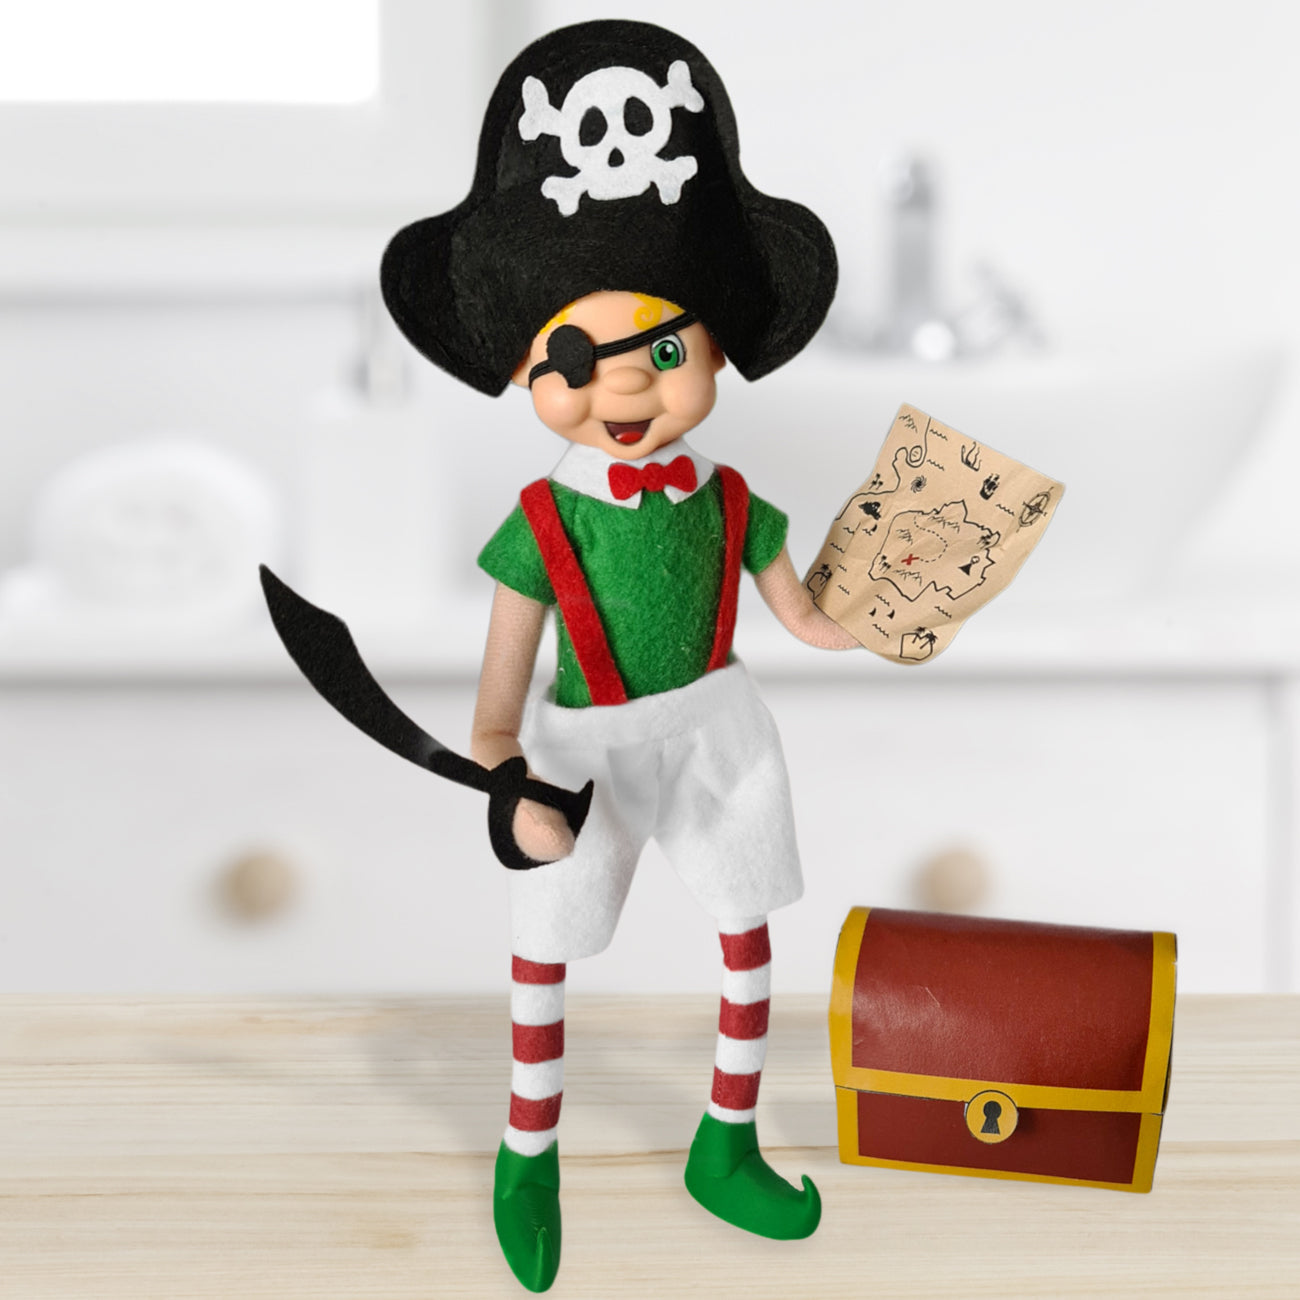 Pirate elf in the bathroom with treasure and map